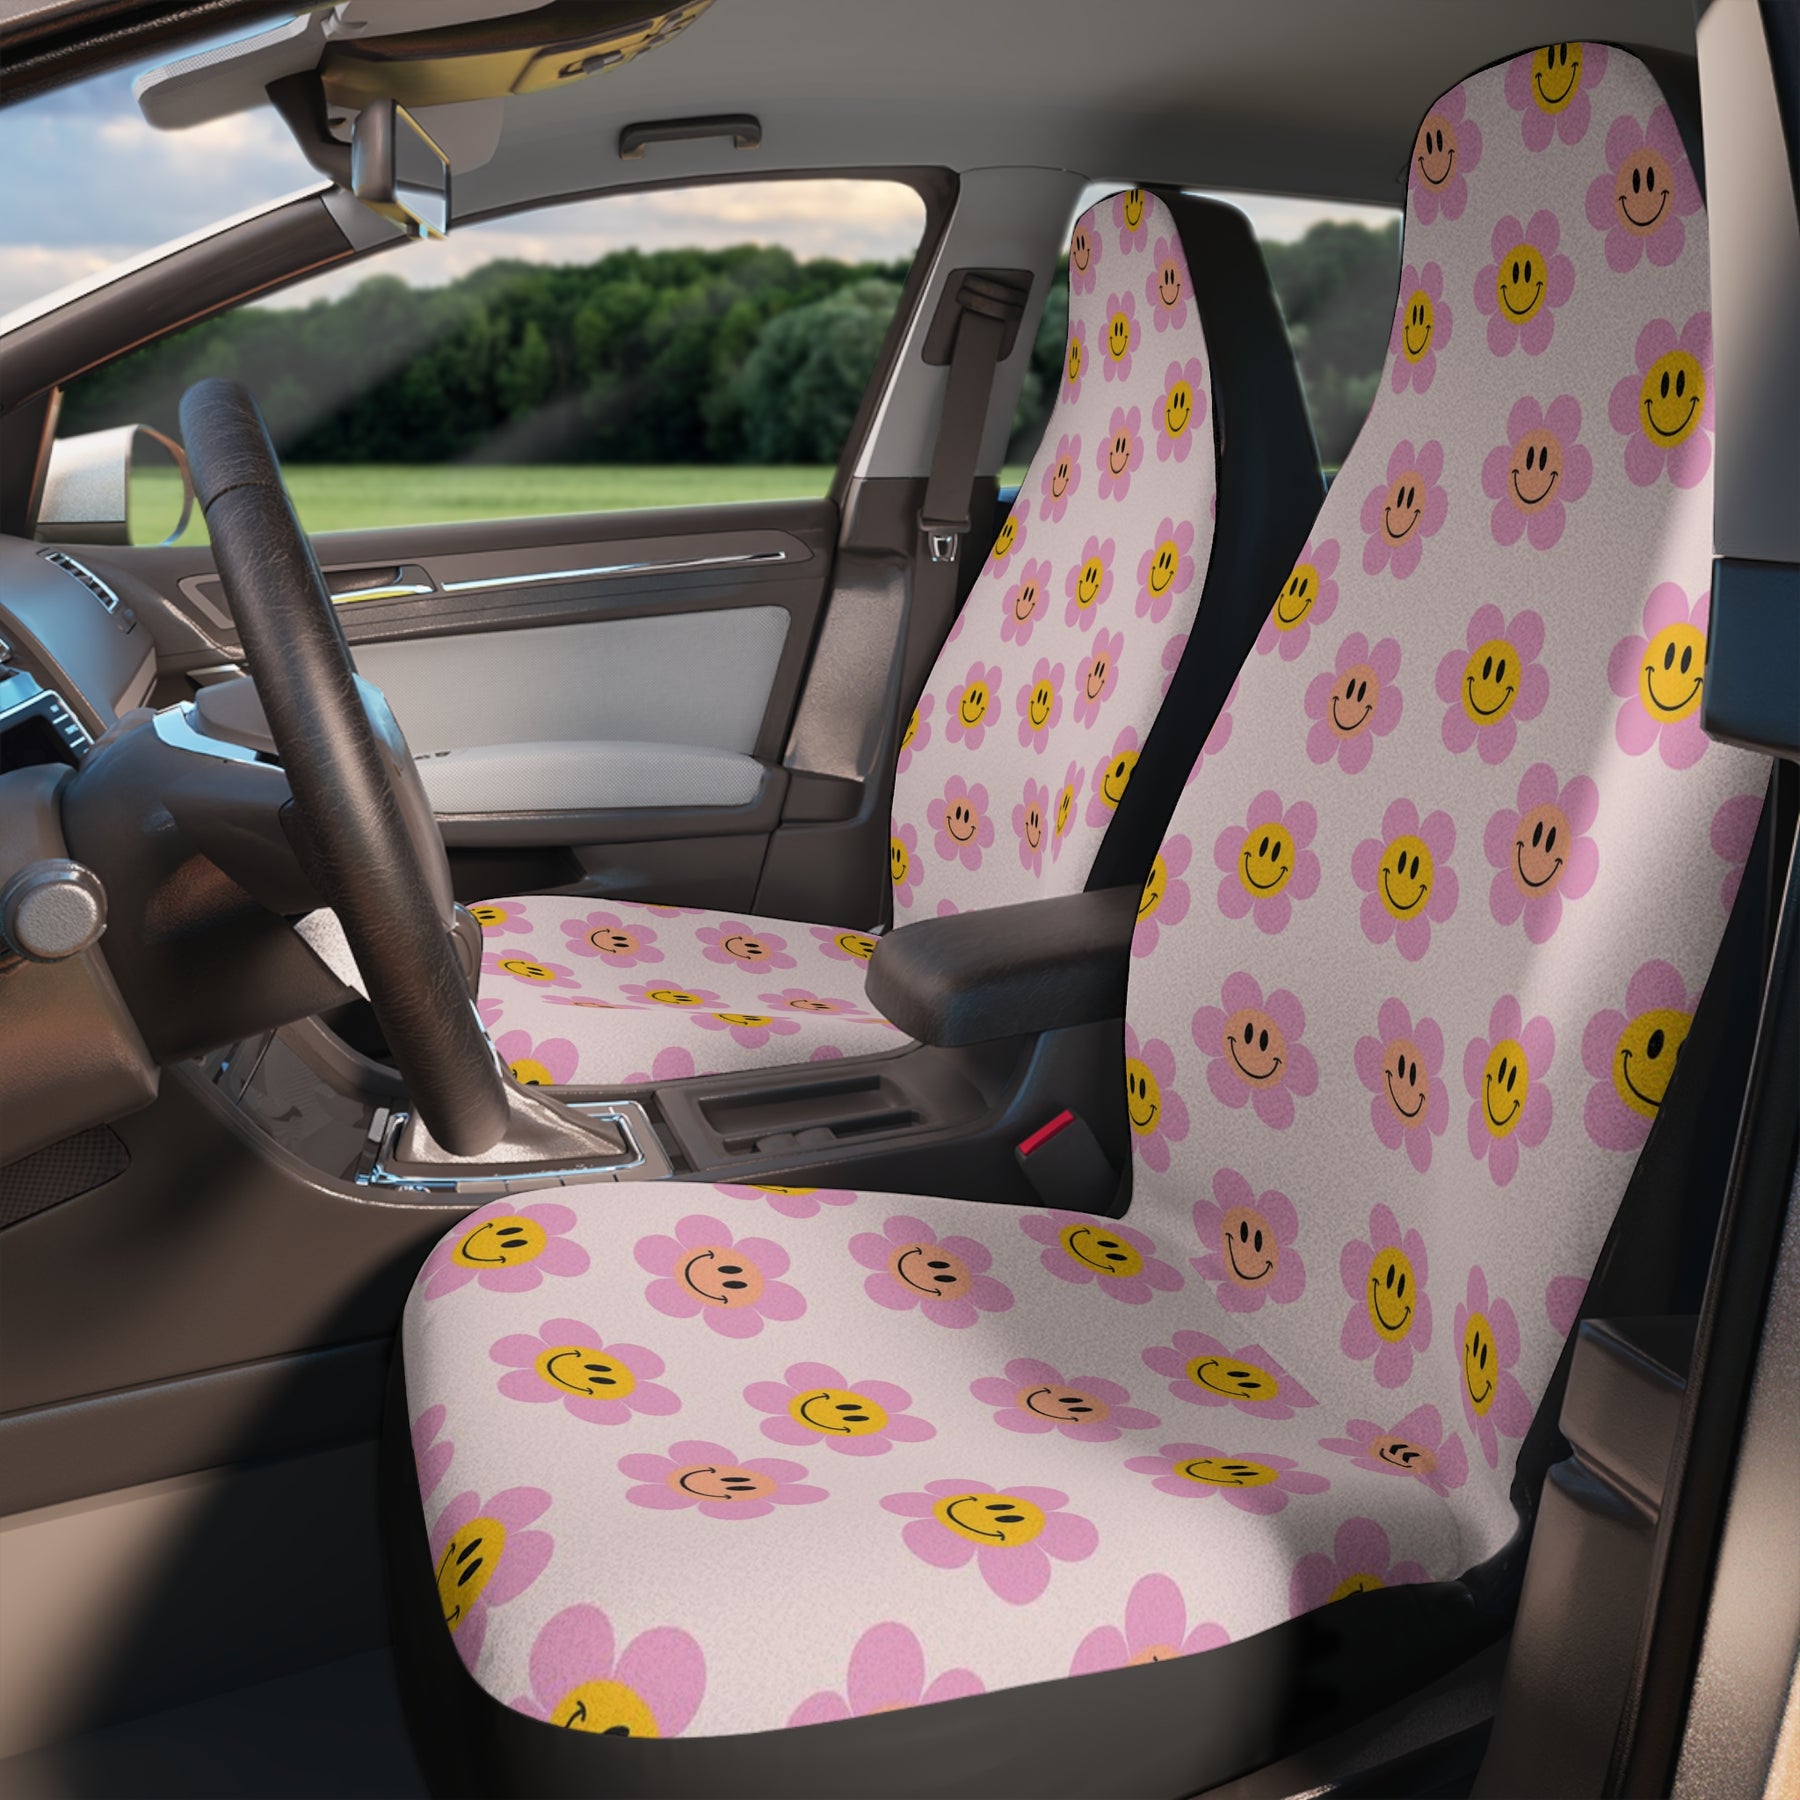 Pink Groovy Flower Smiley Face Car Seat Covers Set, Y2K Retro Car Seat Covers, Funky Girly Car Decor, Textured Car Accessories for Women